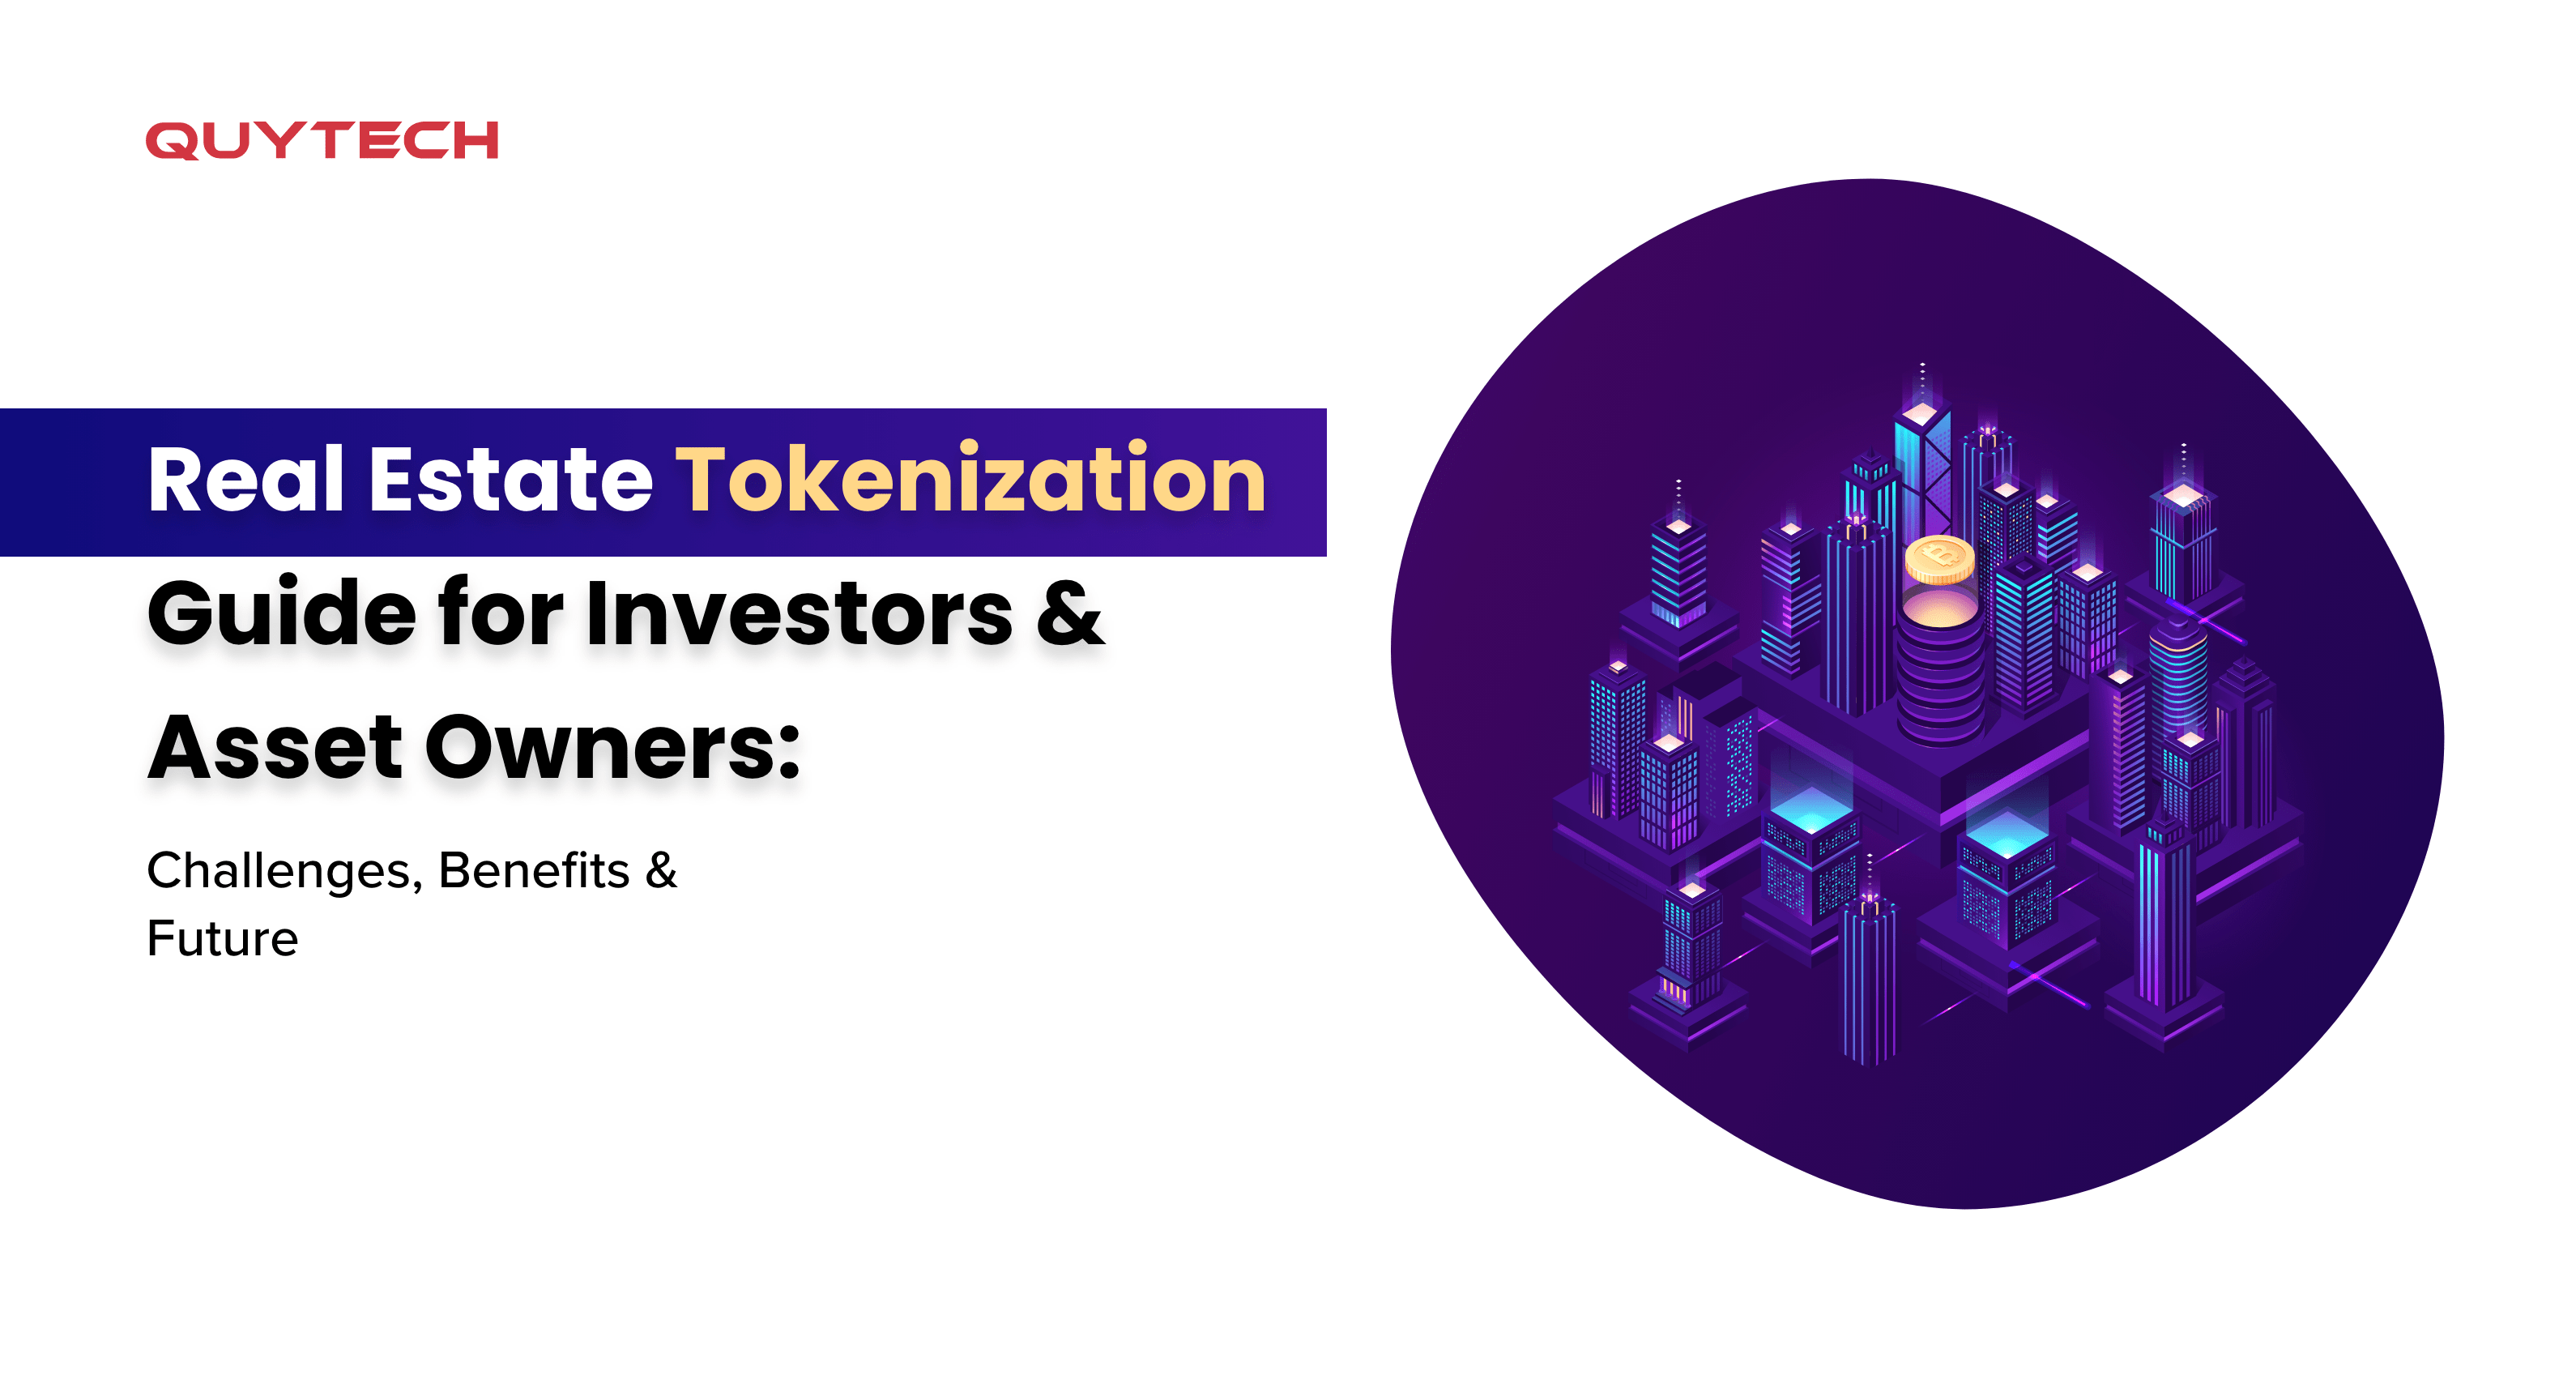 Real Estate Tokenization Guide for investors & asset owners Challenges, Benefits & Future